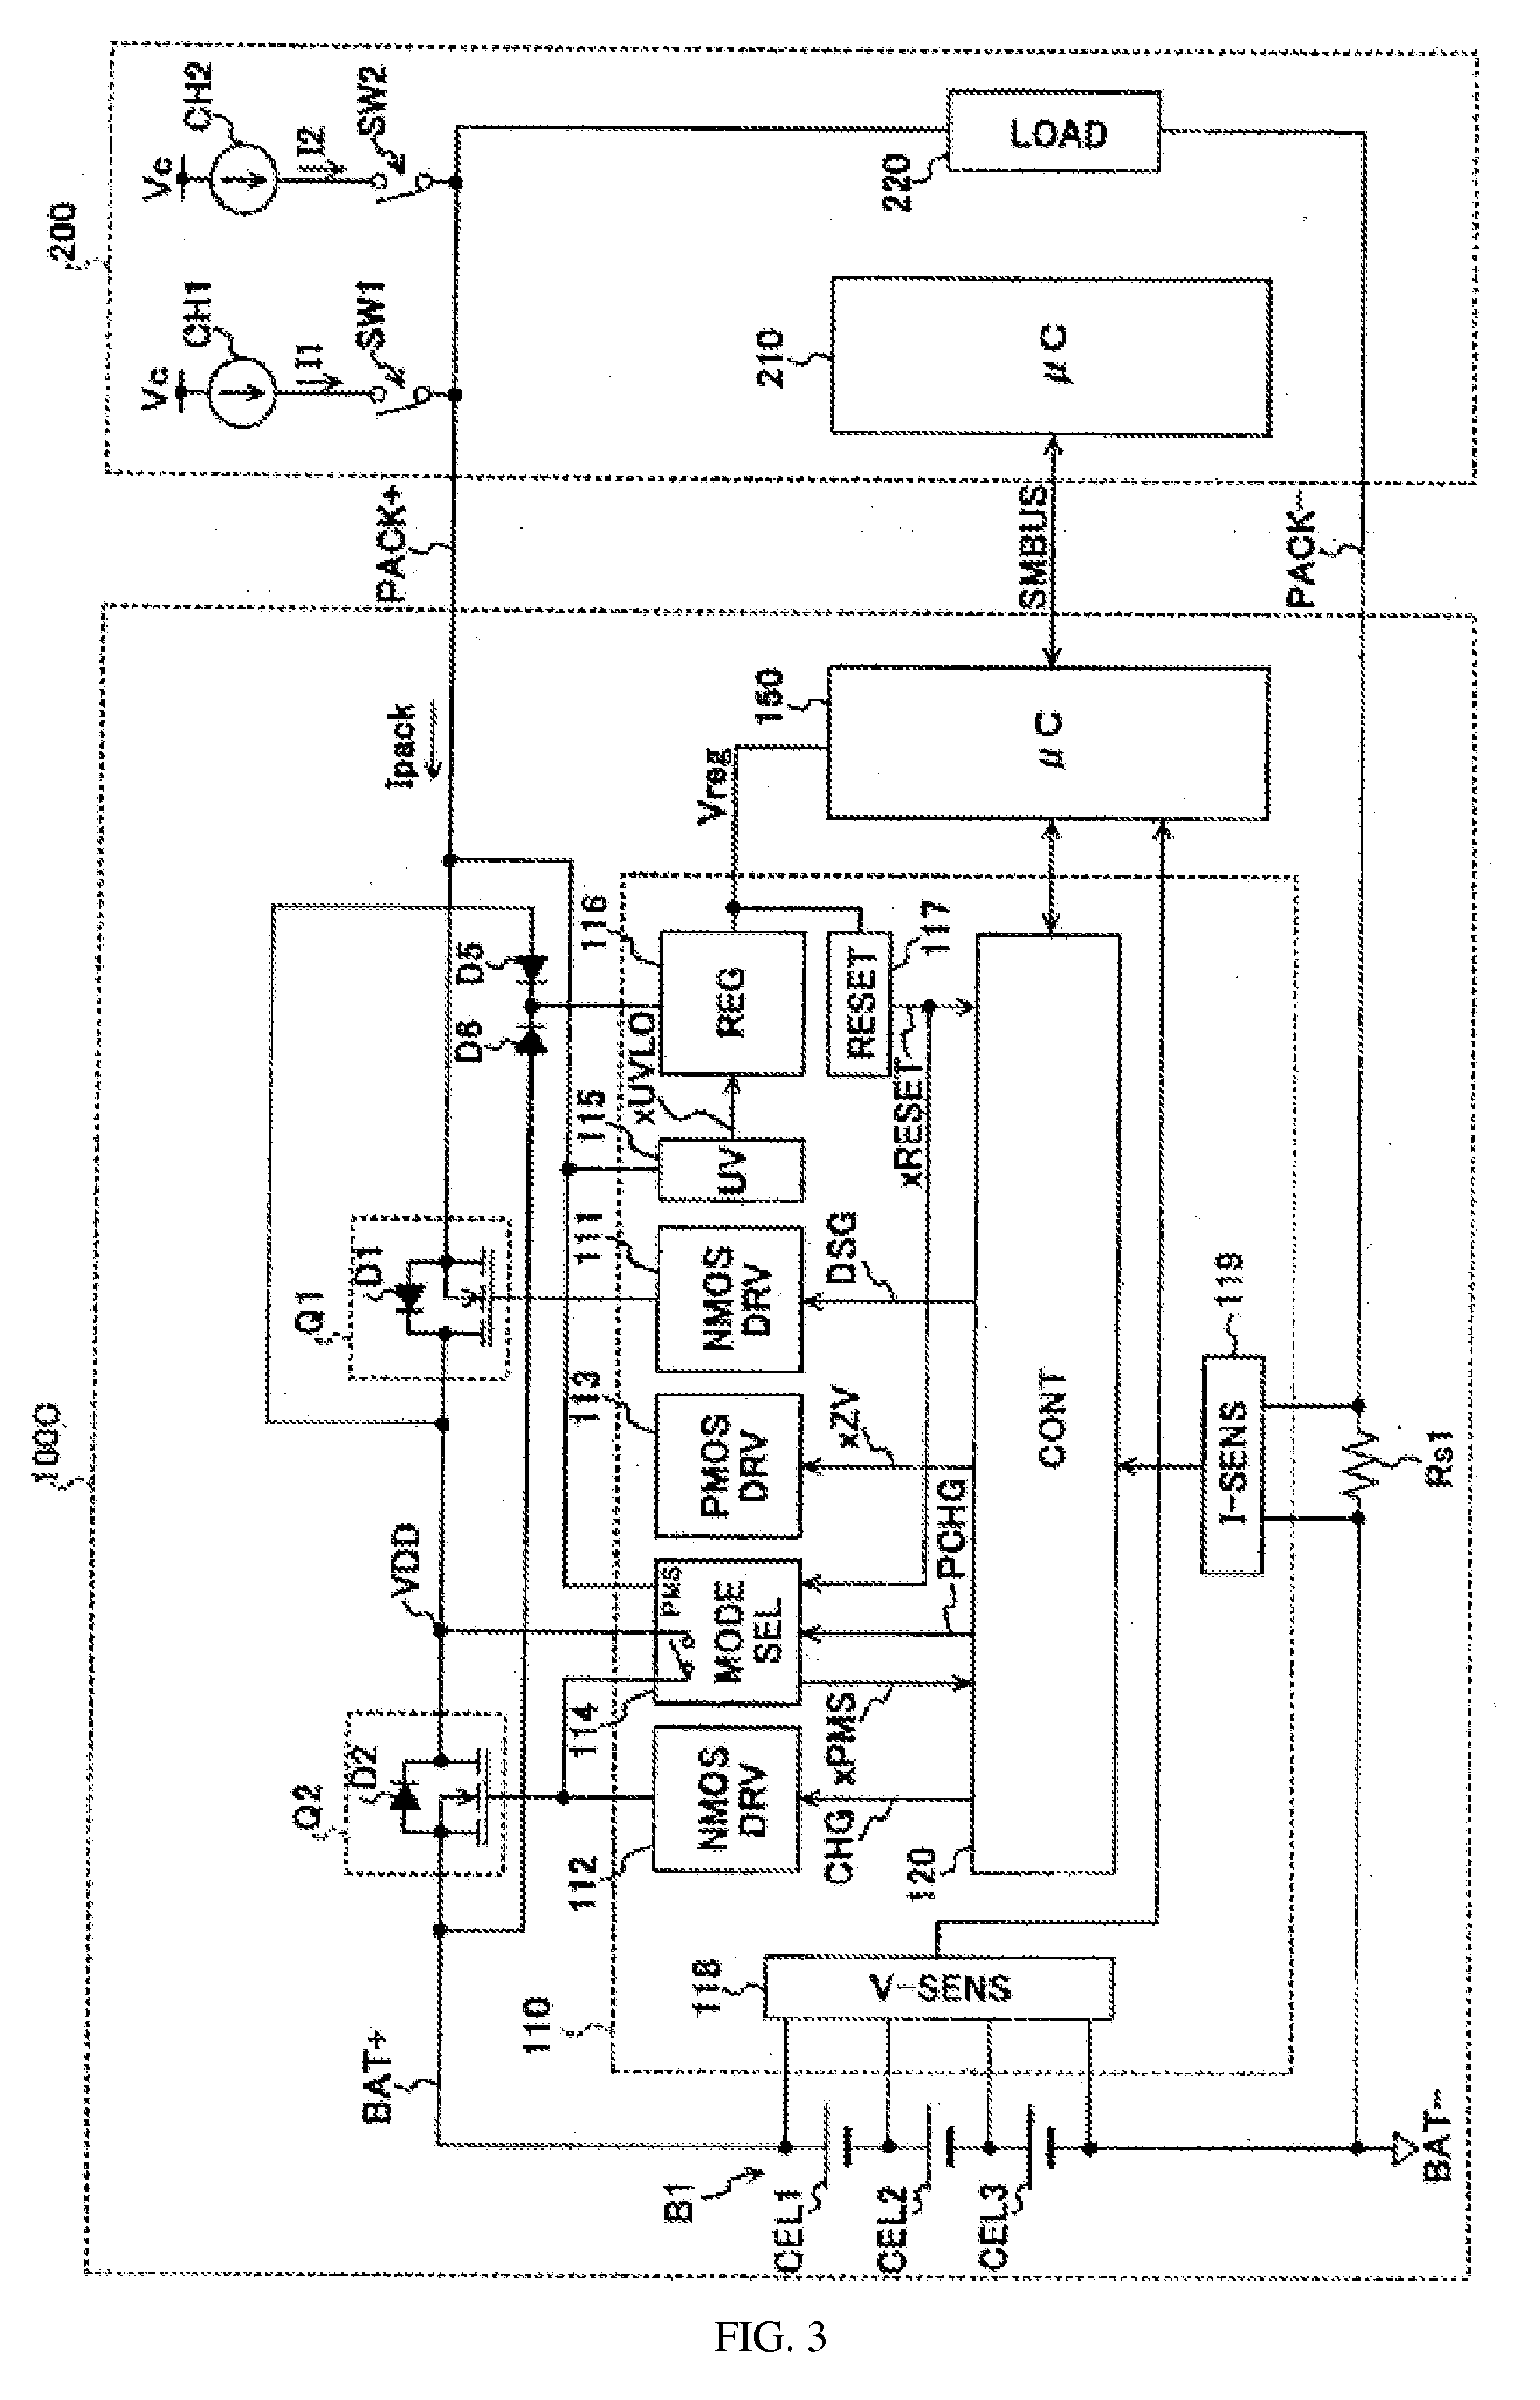 Battery protecting circuit